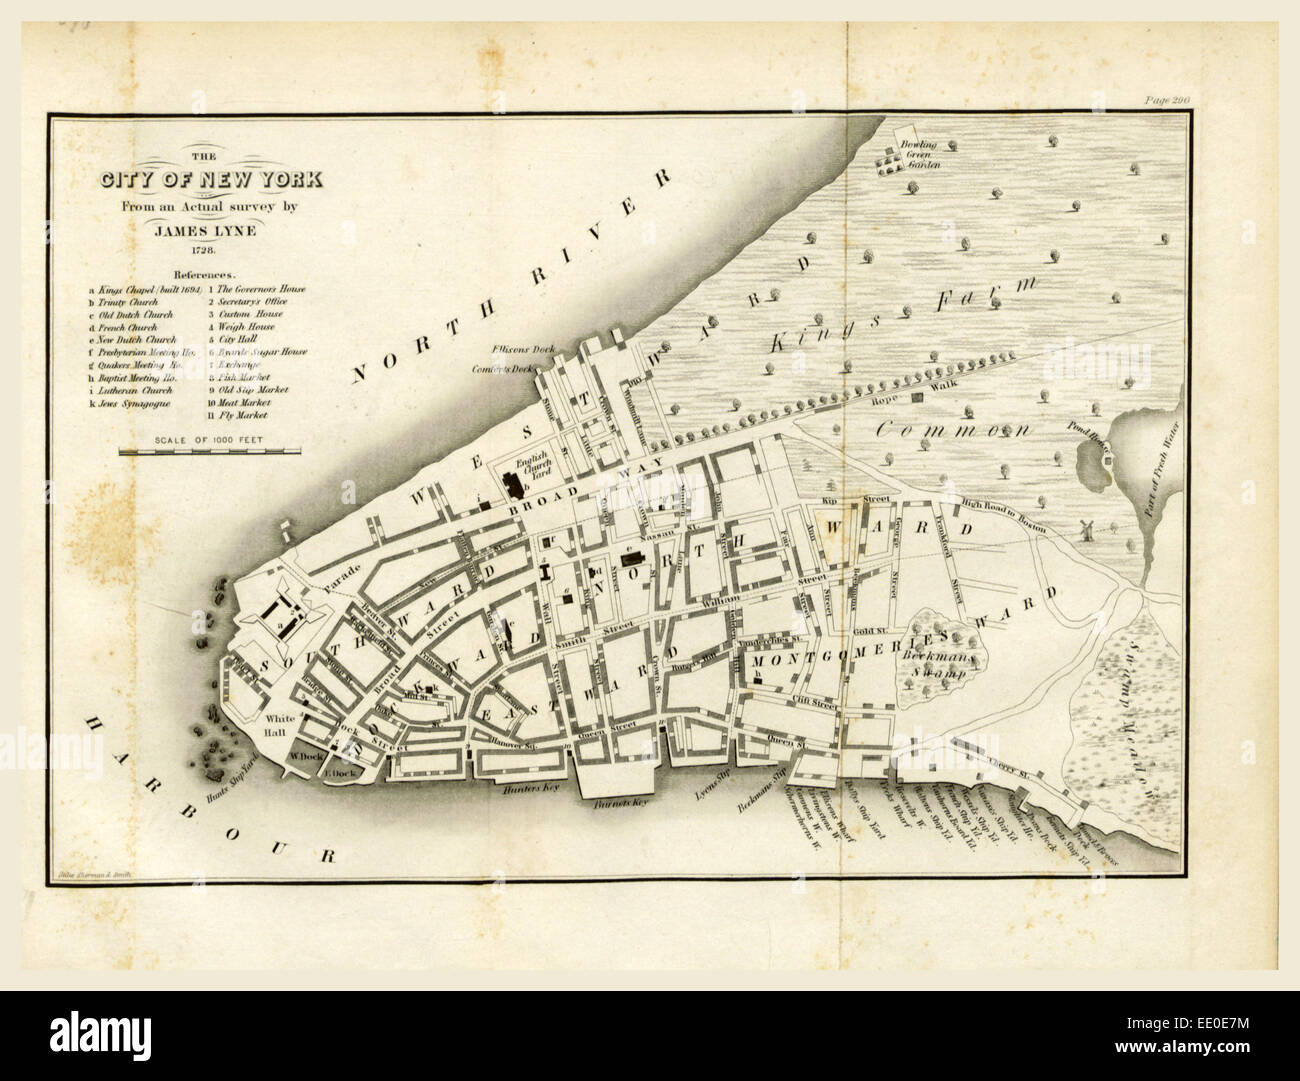 New York Map Stock Photos New York Map Stock Images Alamy - map of new york 1728 history of the new netherlands province of new